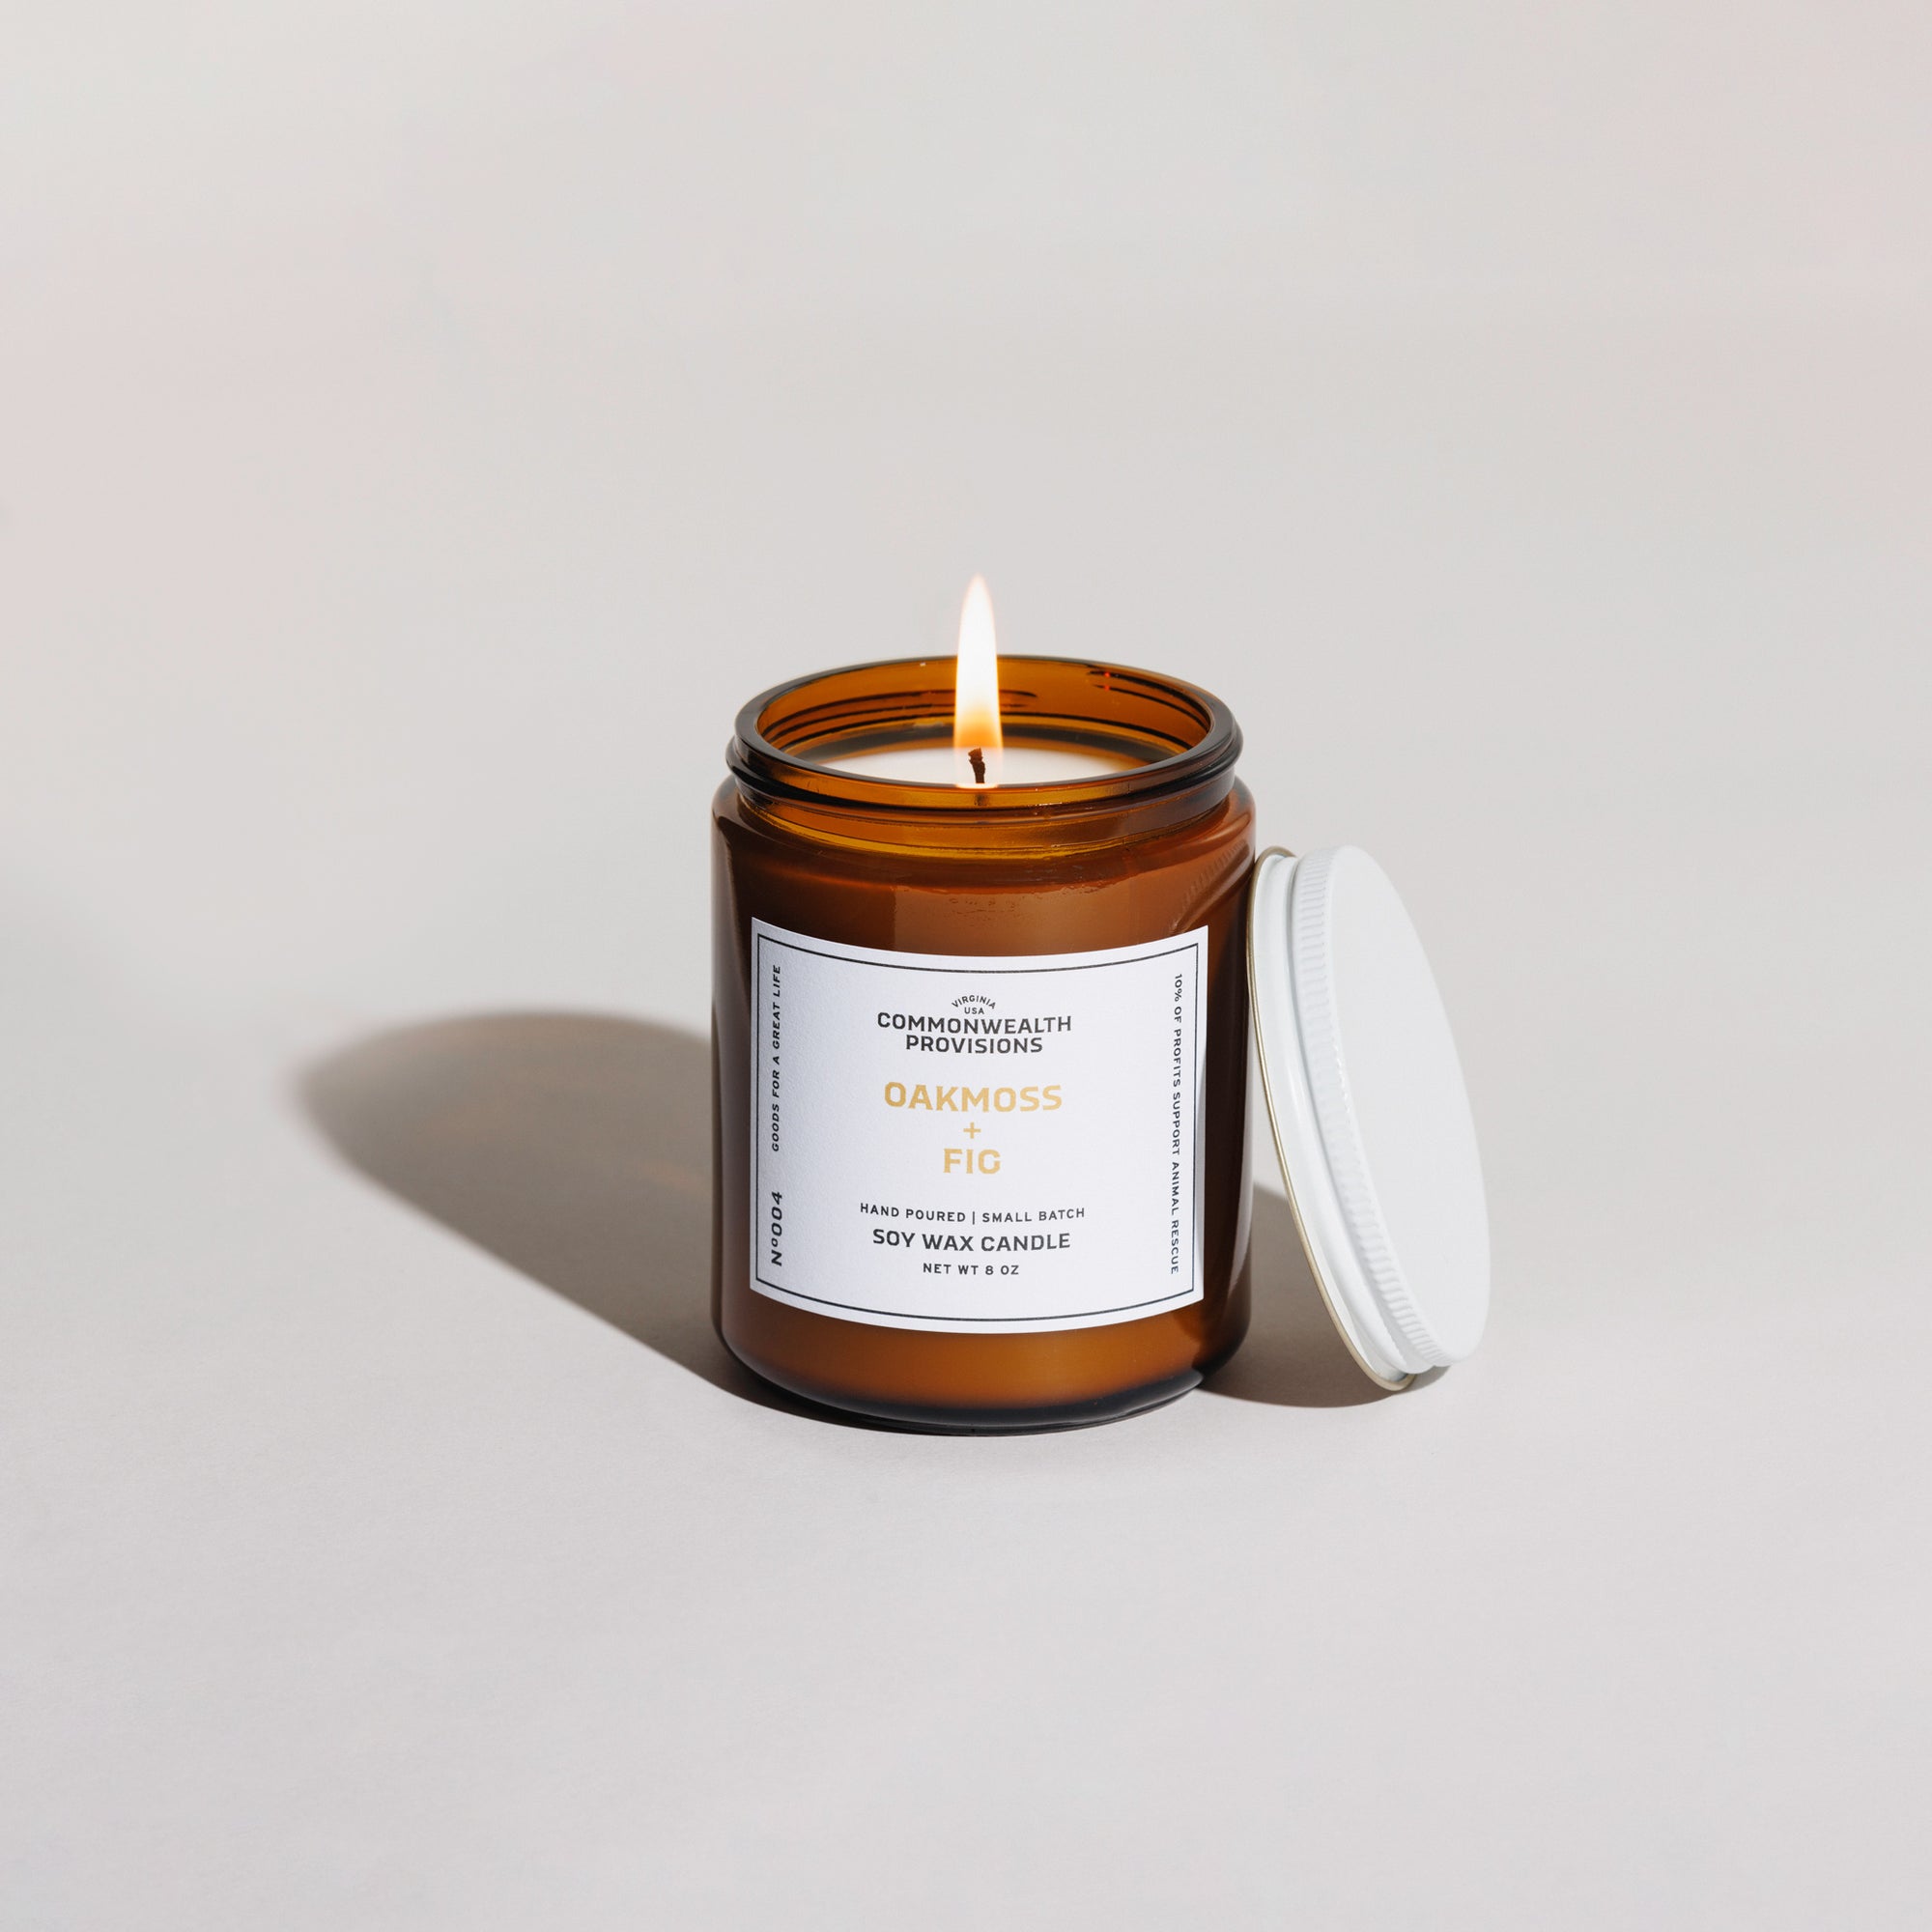 Oakmoss + Fig Standard Candle | Commonwealth Provisions